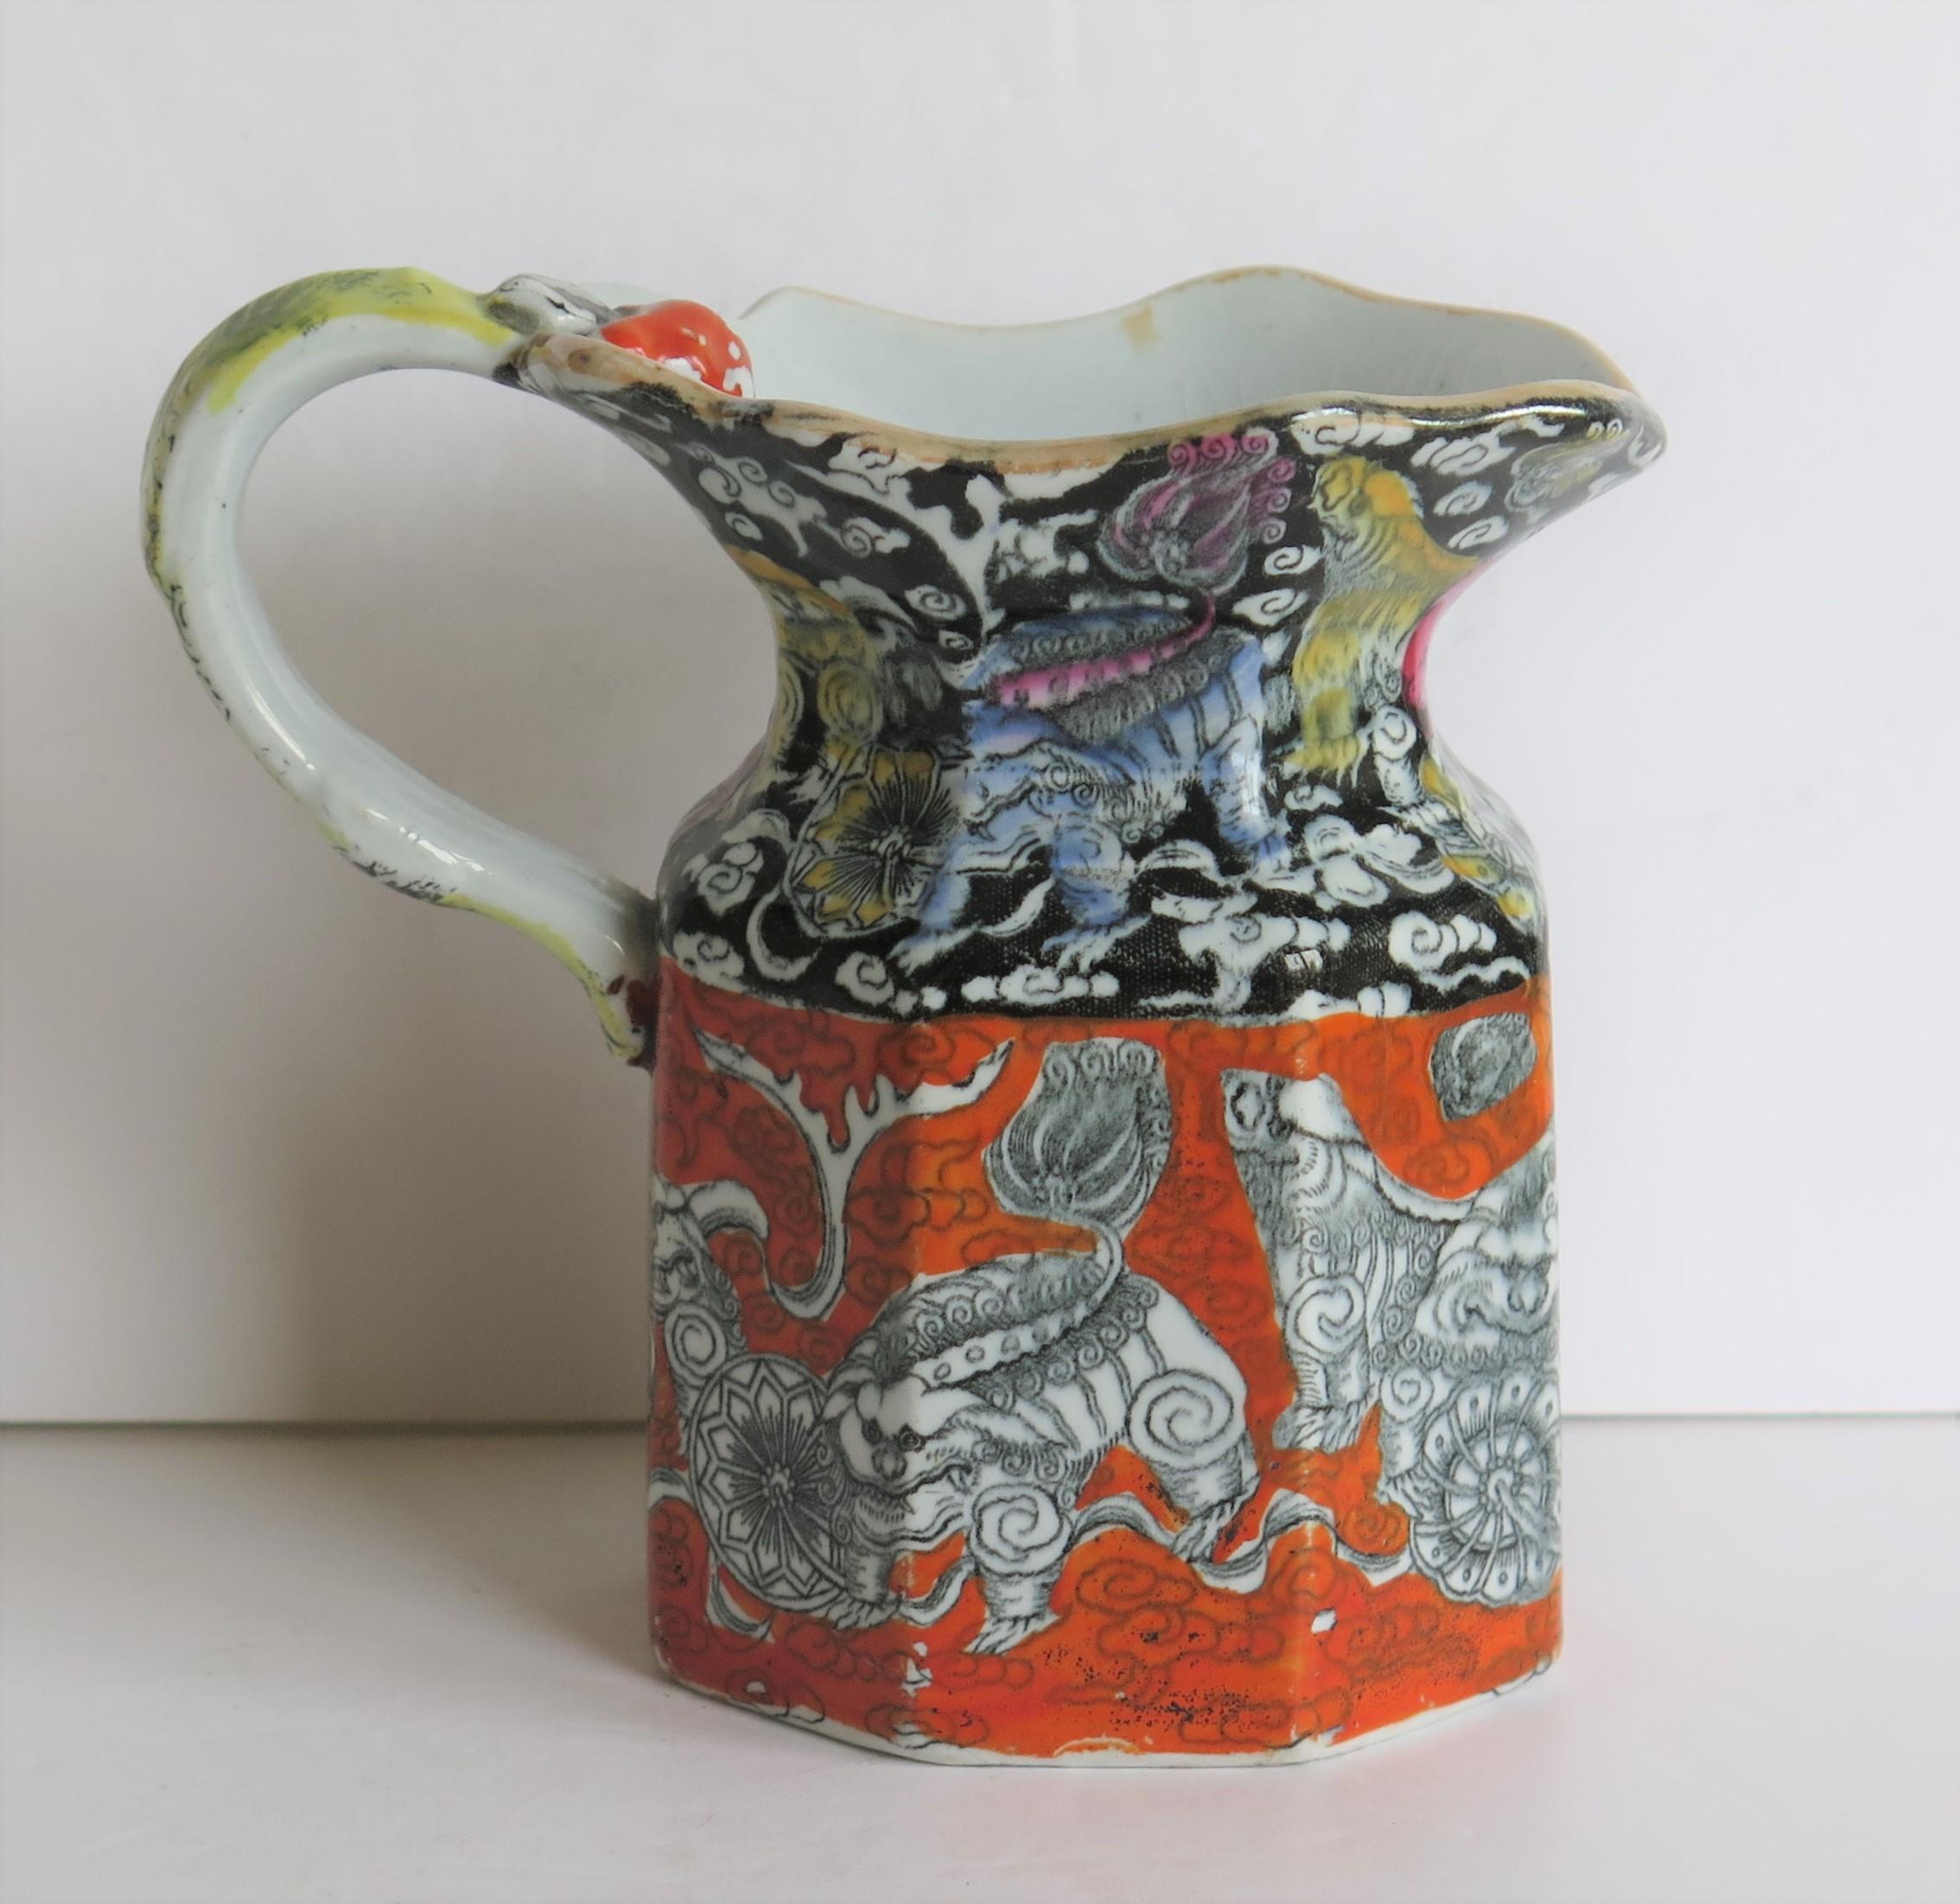 This is a very decorative Jug or Pitcher by Mason's Ironstone pottery, in the striking Bandana pattern, made in the mid-19th century, Circa 1840. 

The jug is hand decorated over a transfer printed pattern with the striking chinoiserie influenced